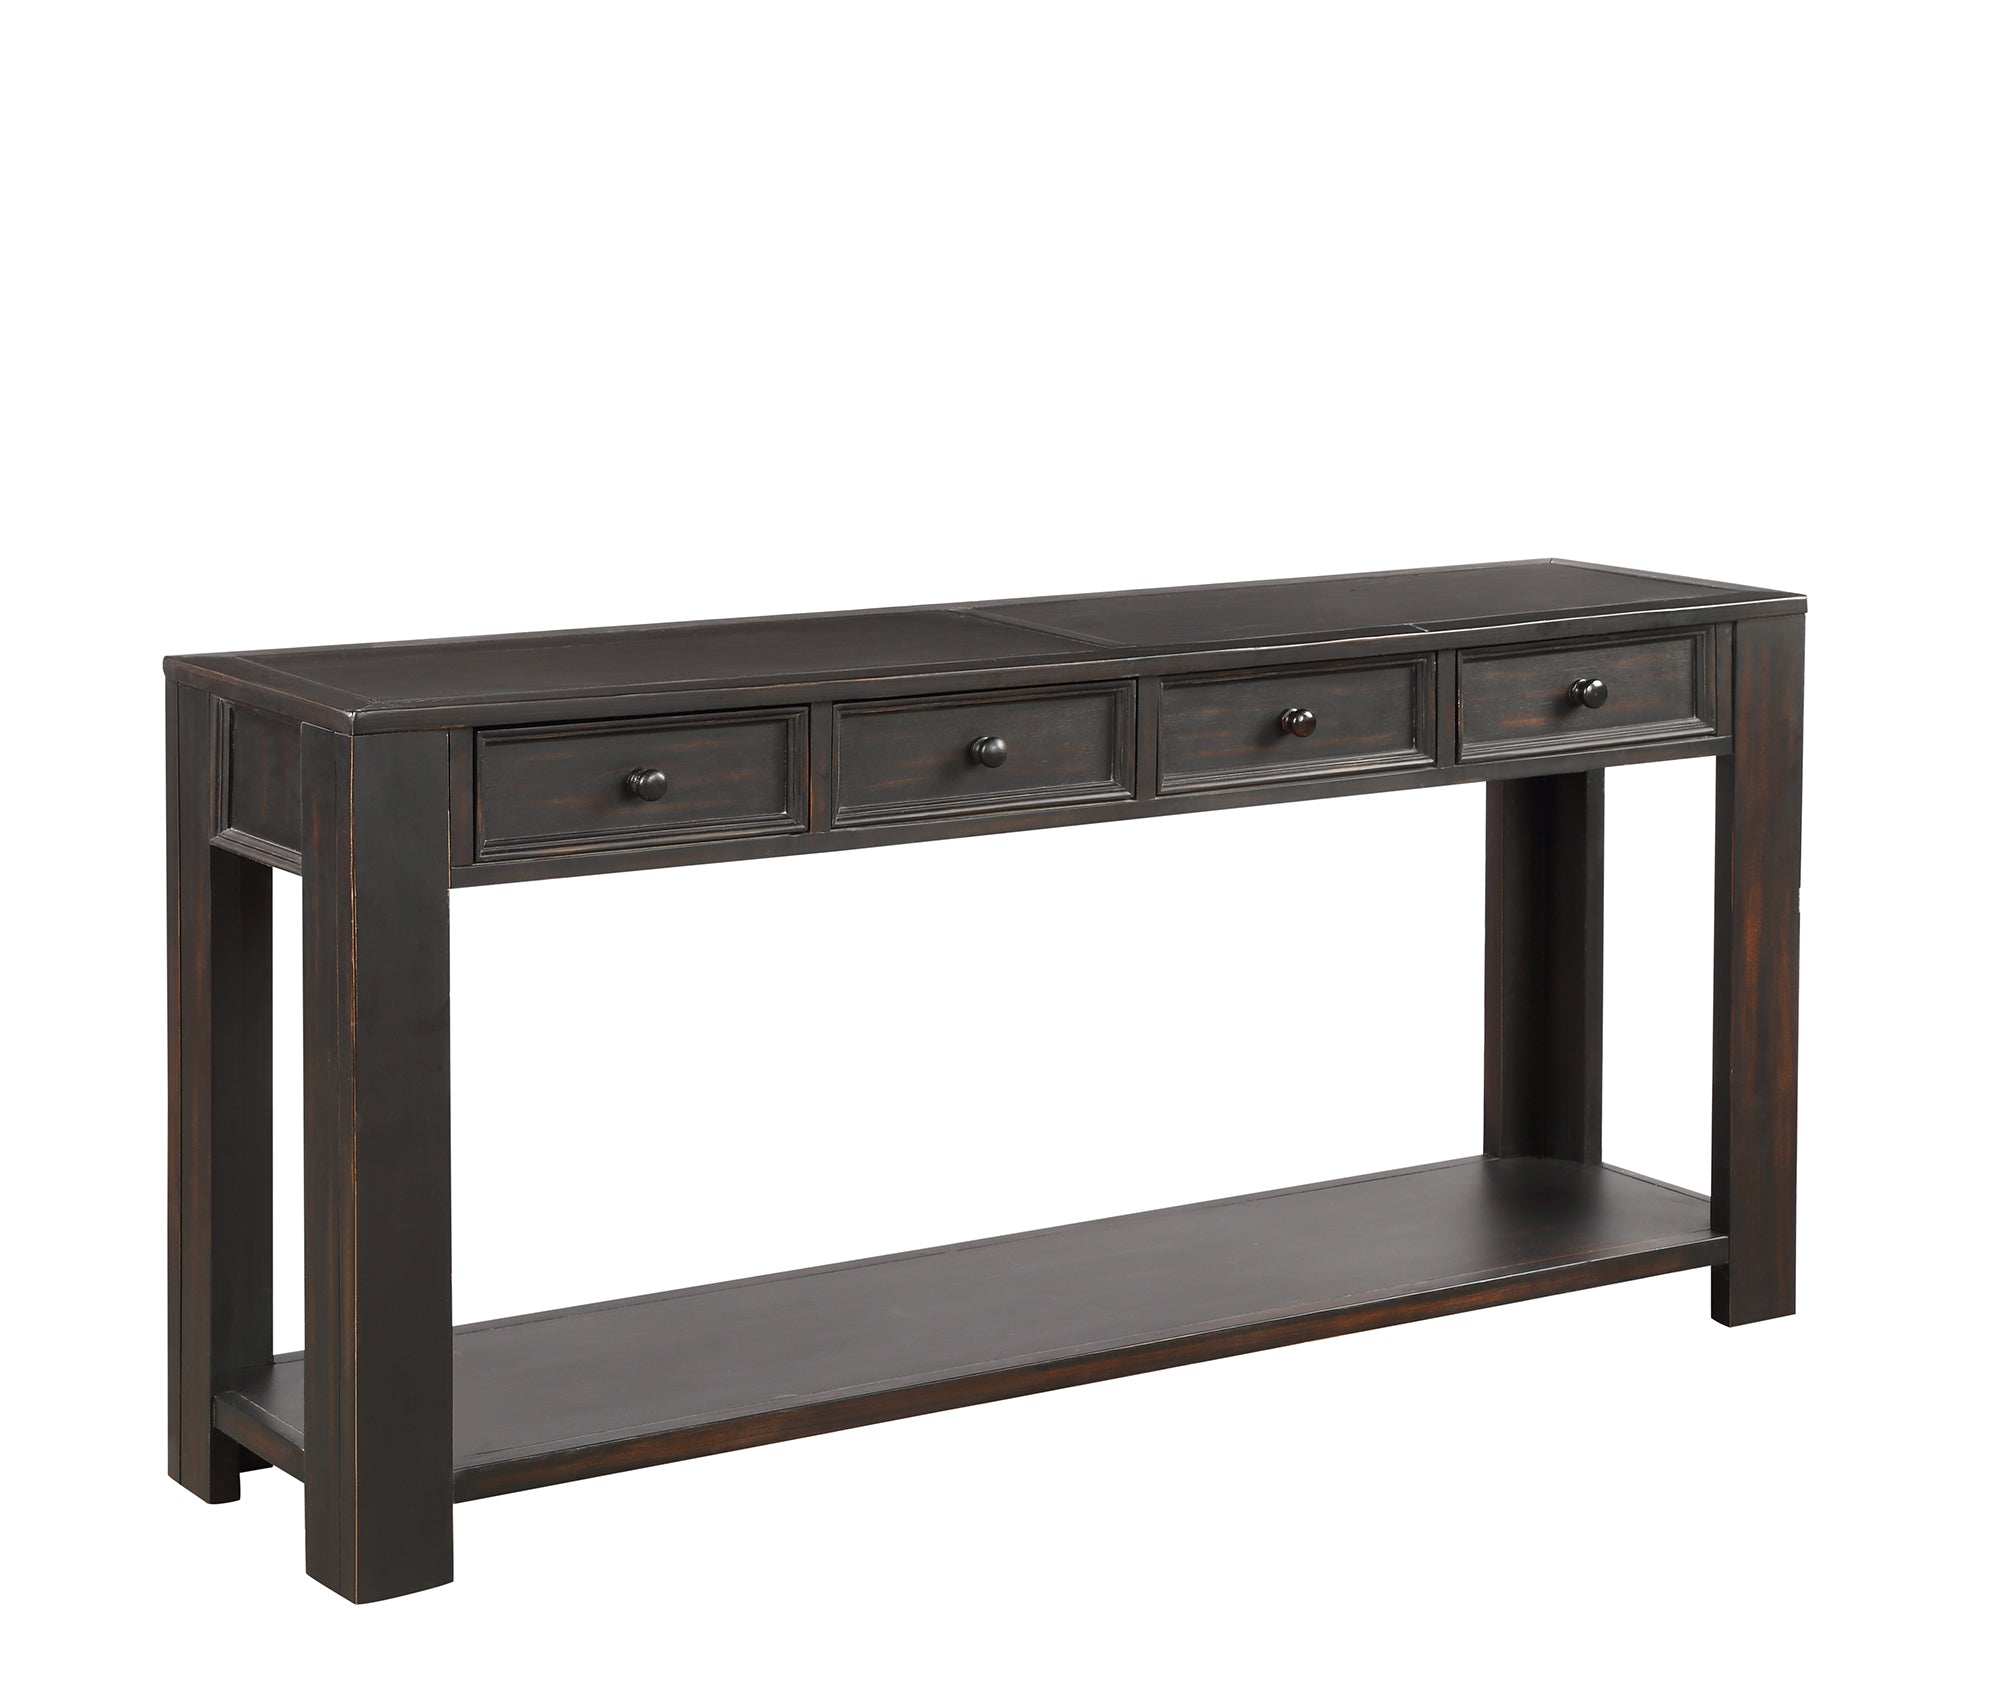 Console Table for Entryway Hallway Sofa Table with Storage Drawers and Bottom Shelf (Black)